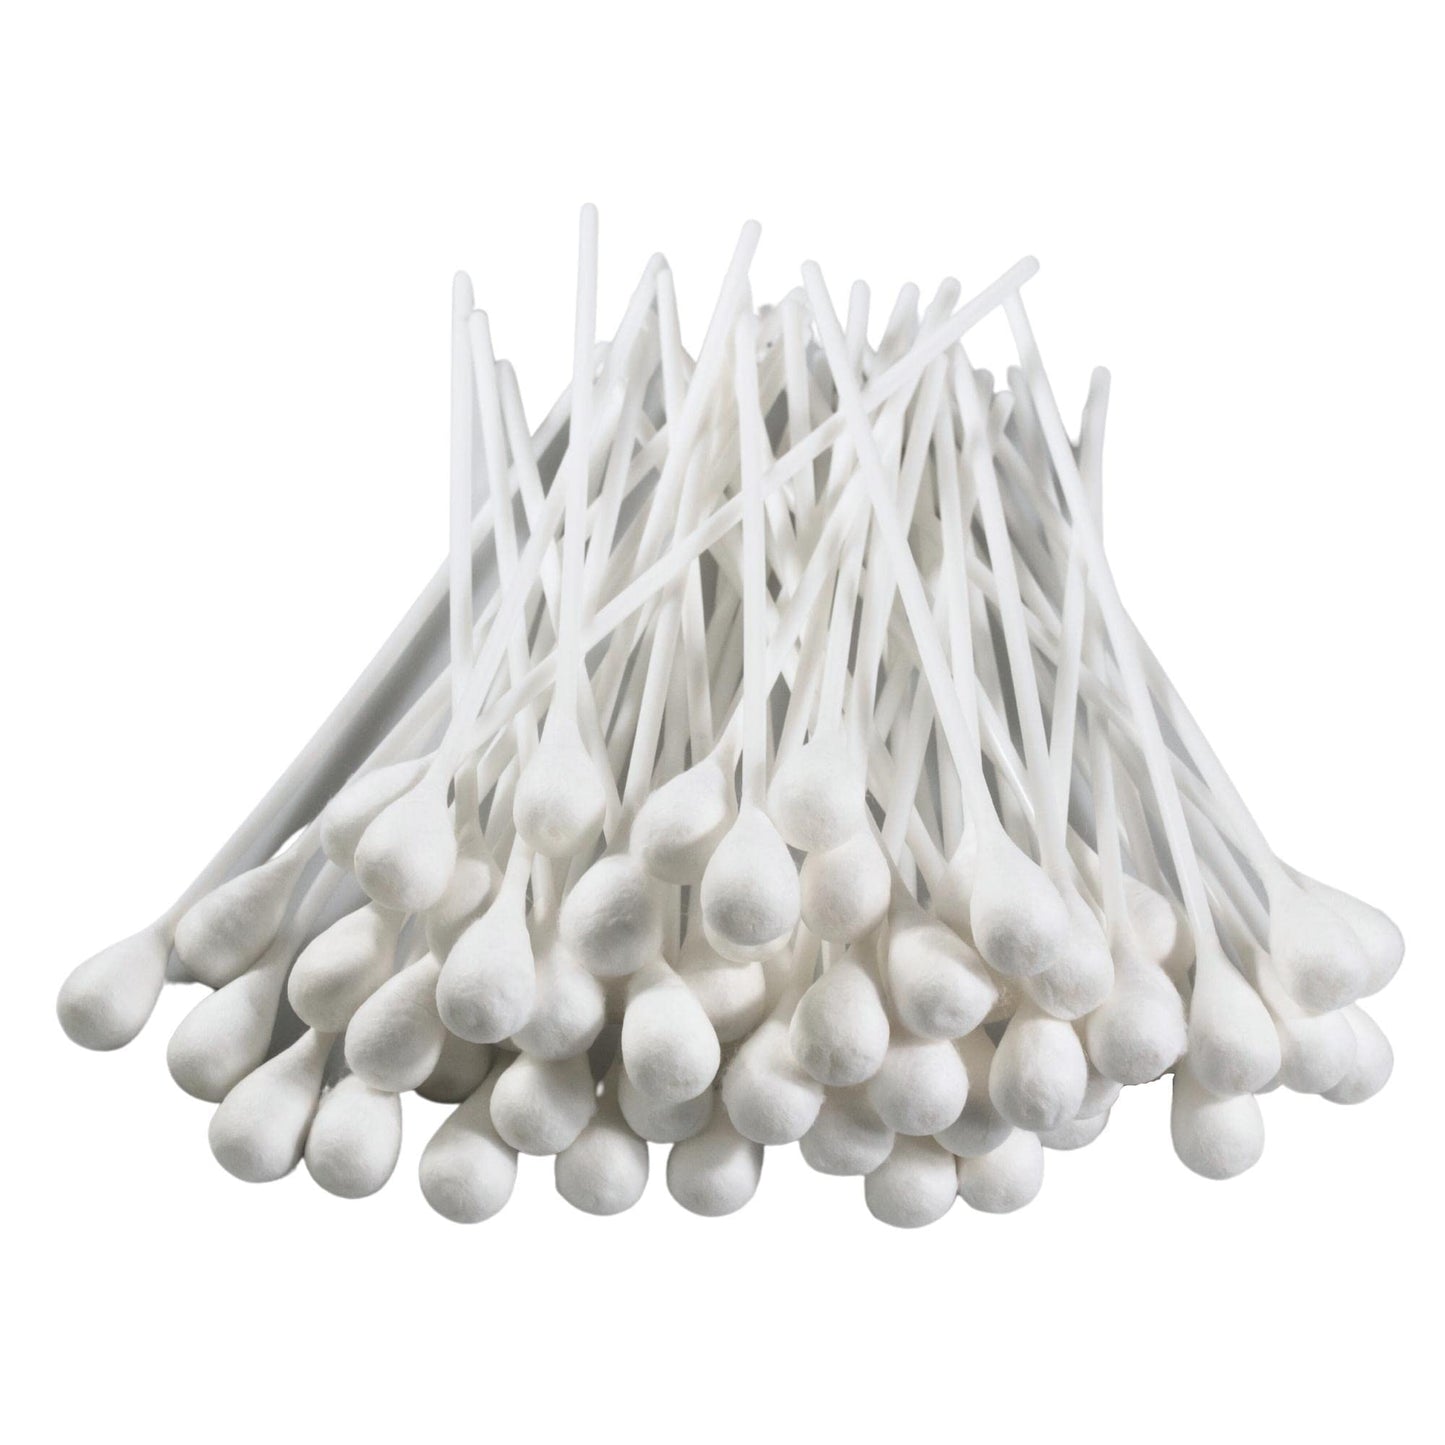 Oversized Swabs [Pack of 100] Extra-long 8" Cotton Tipped Applicators with Large 1/2" Diameter Swab - Non-sterile – Plastic Shaft